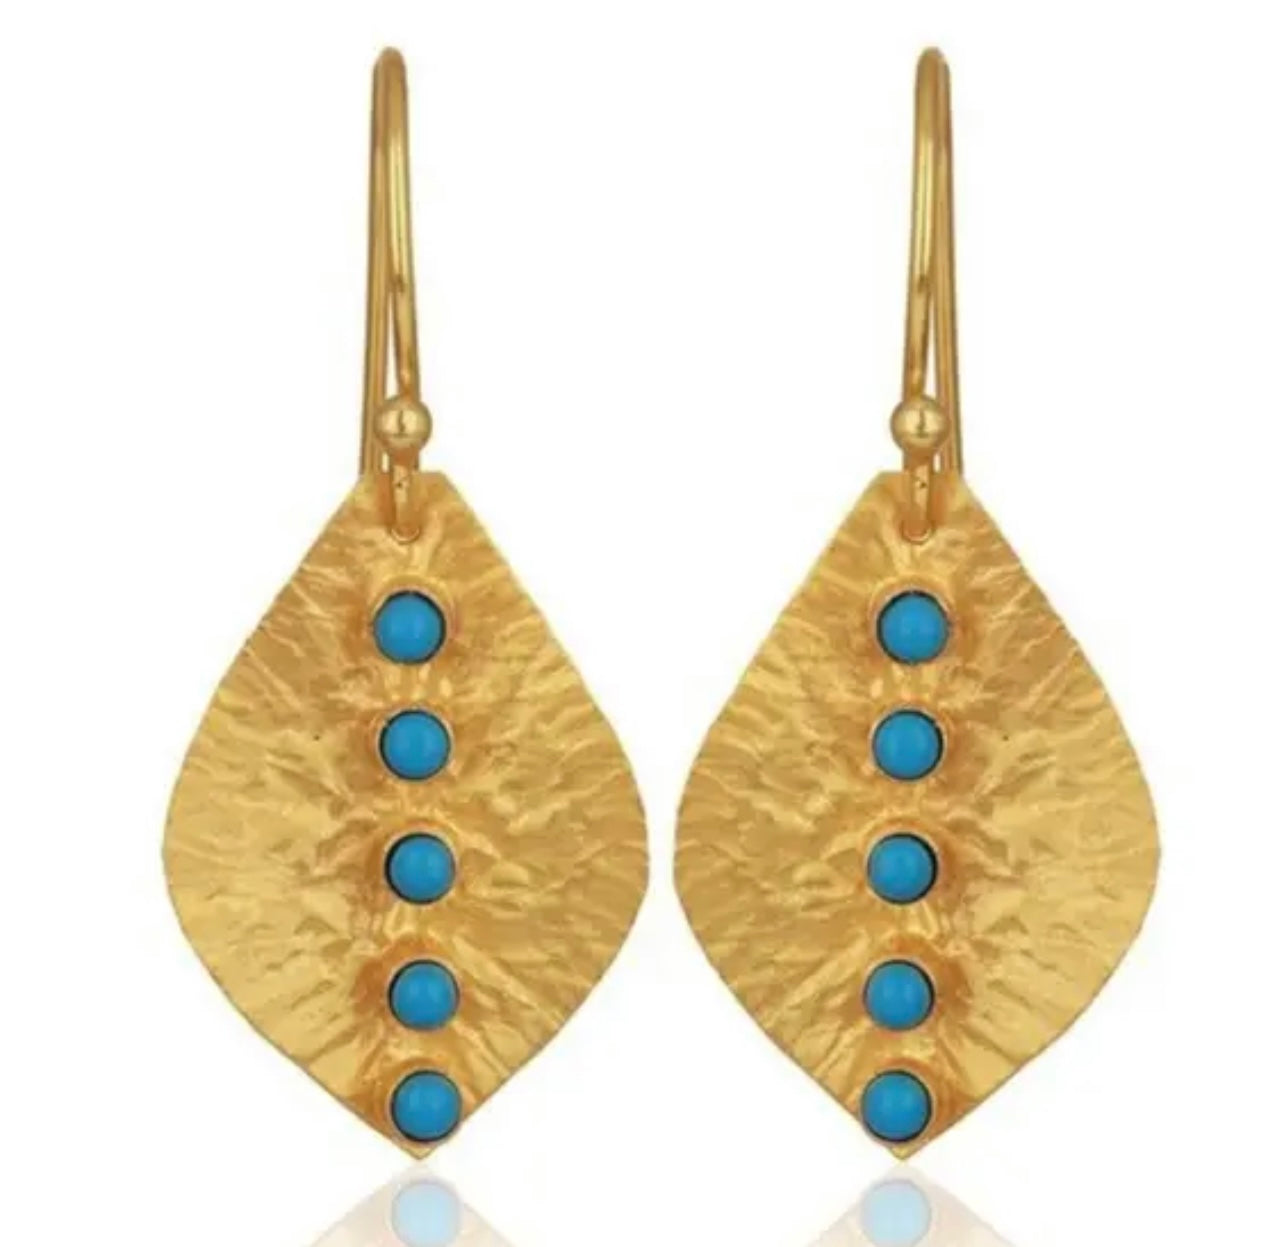 Petite 24k Gold Leaf Hammered Turquoise Earrings 1.0”